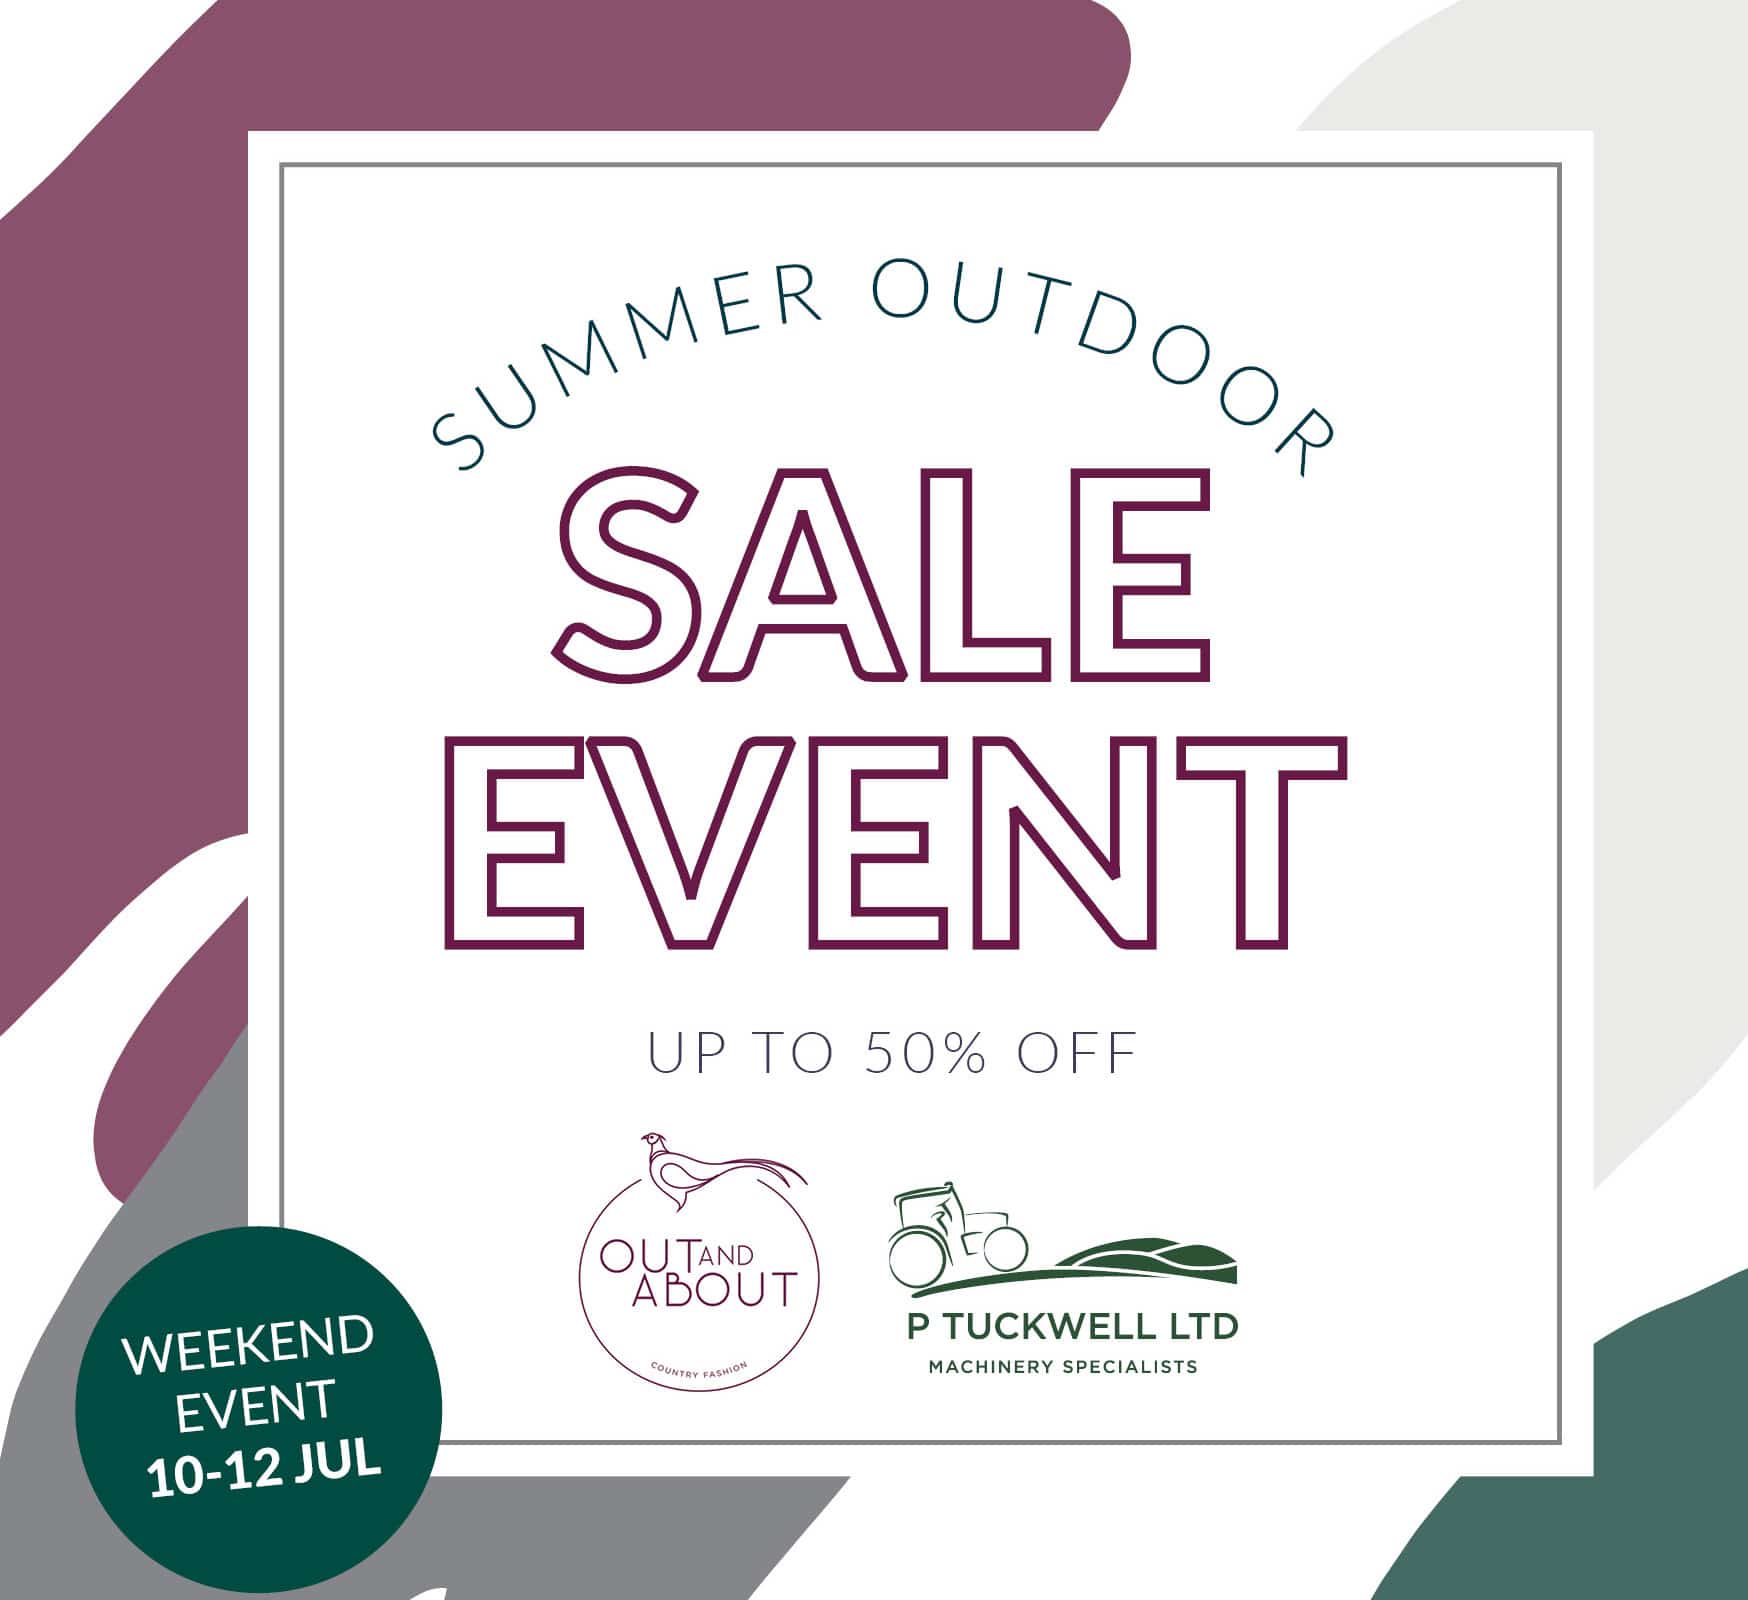 Summer Outdoor Sale Event (O&A)